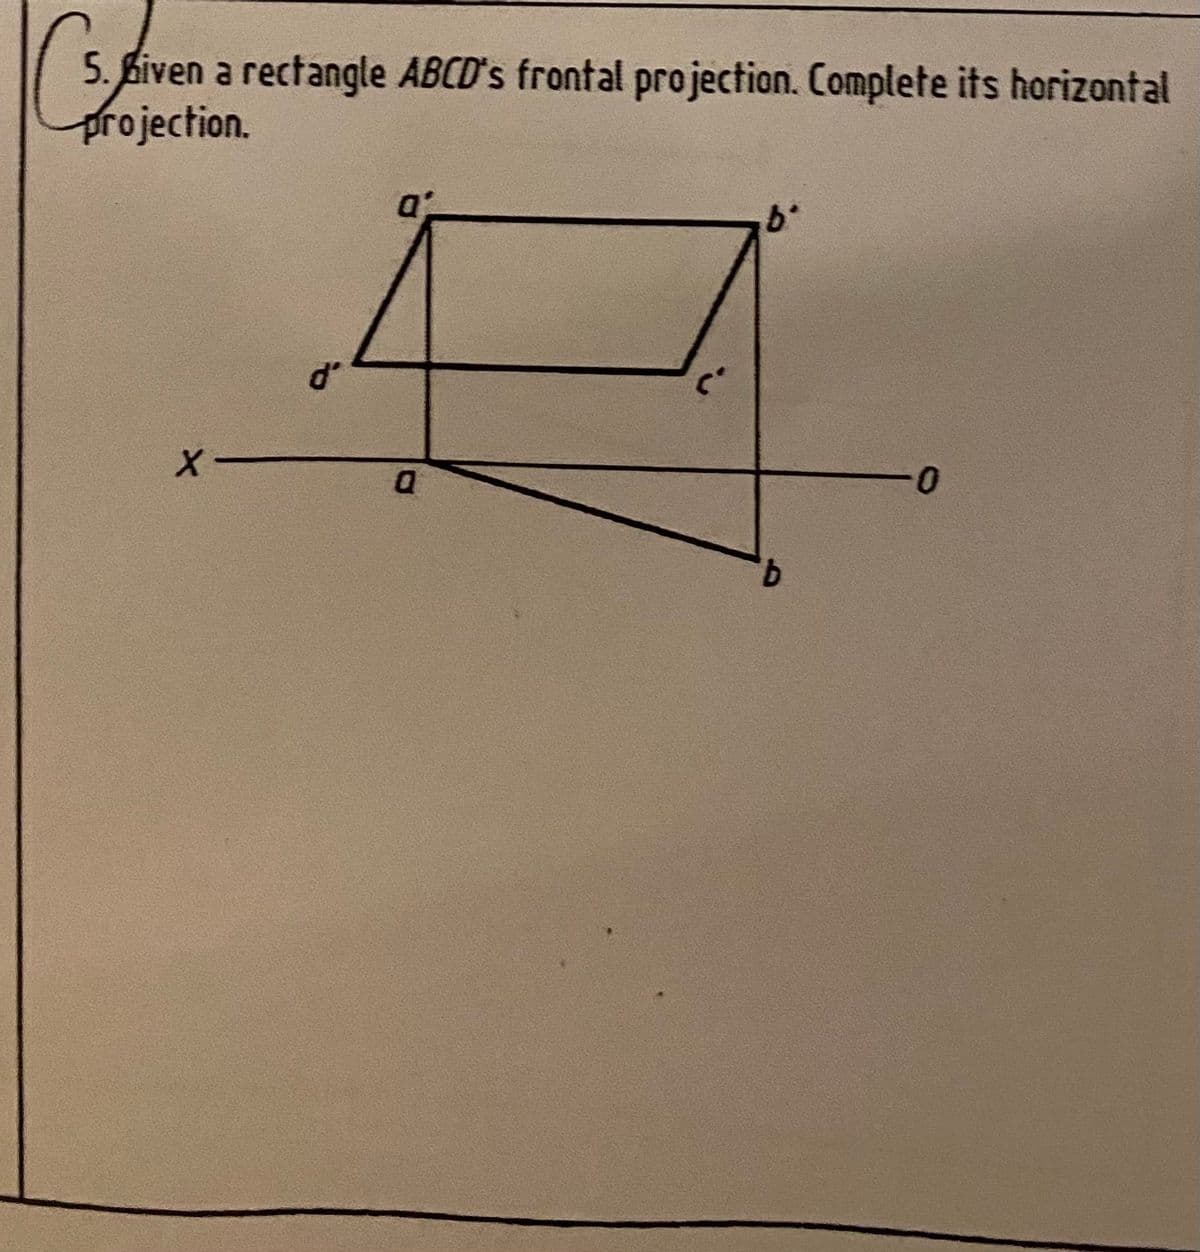 5. biven a rectangle ABCD's frontal projection. Complete its horizontal
projection.
9,
